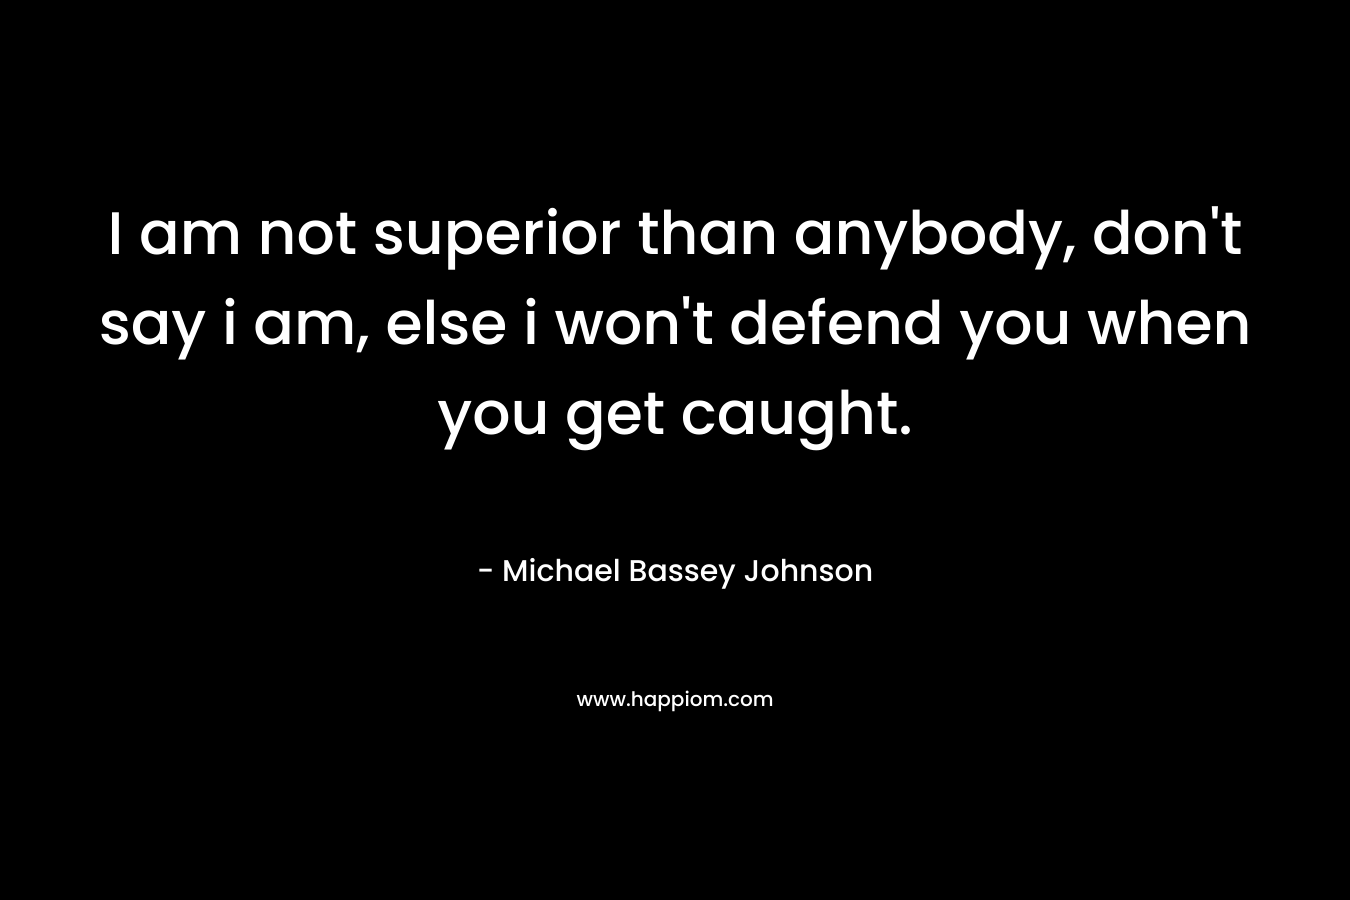 I am not superior than anybody, don't say i am, else i won't defend you when you get caught.